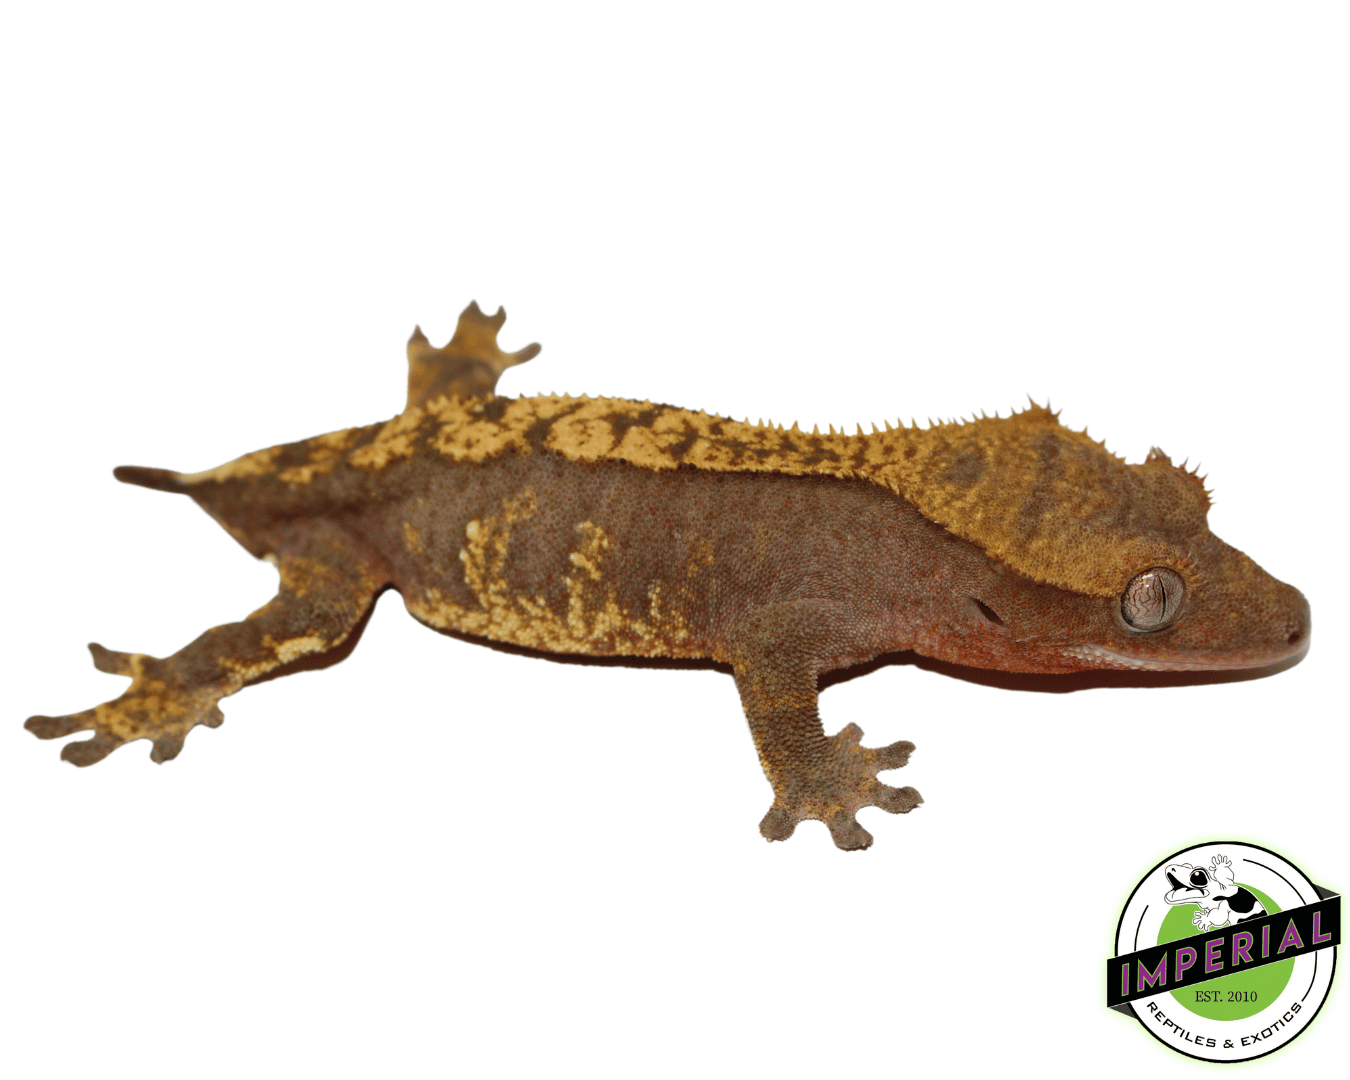 adult crested gecko for sale online, buy crested geckos at cheap prices